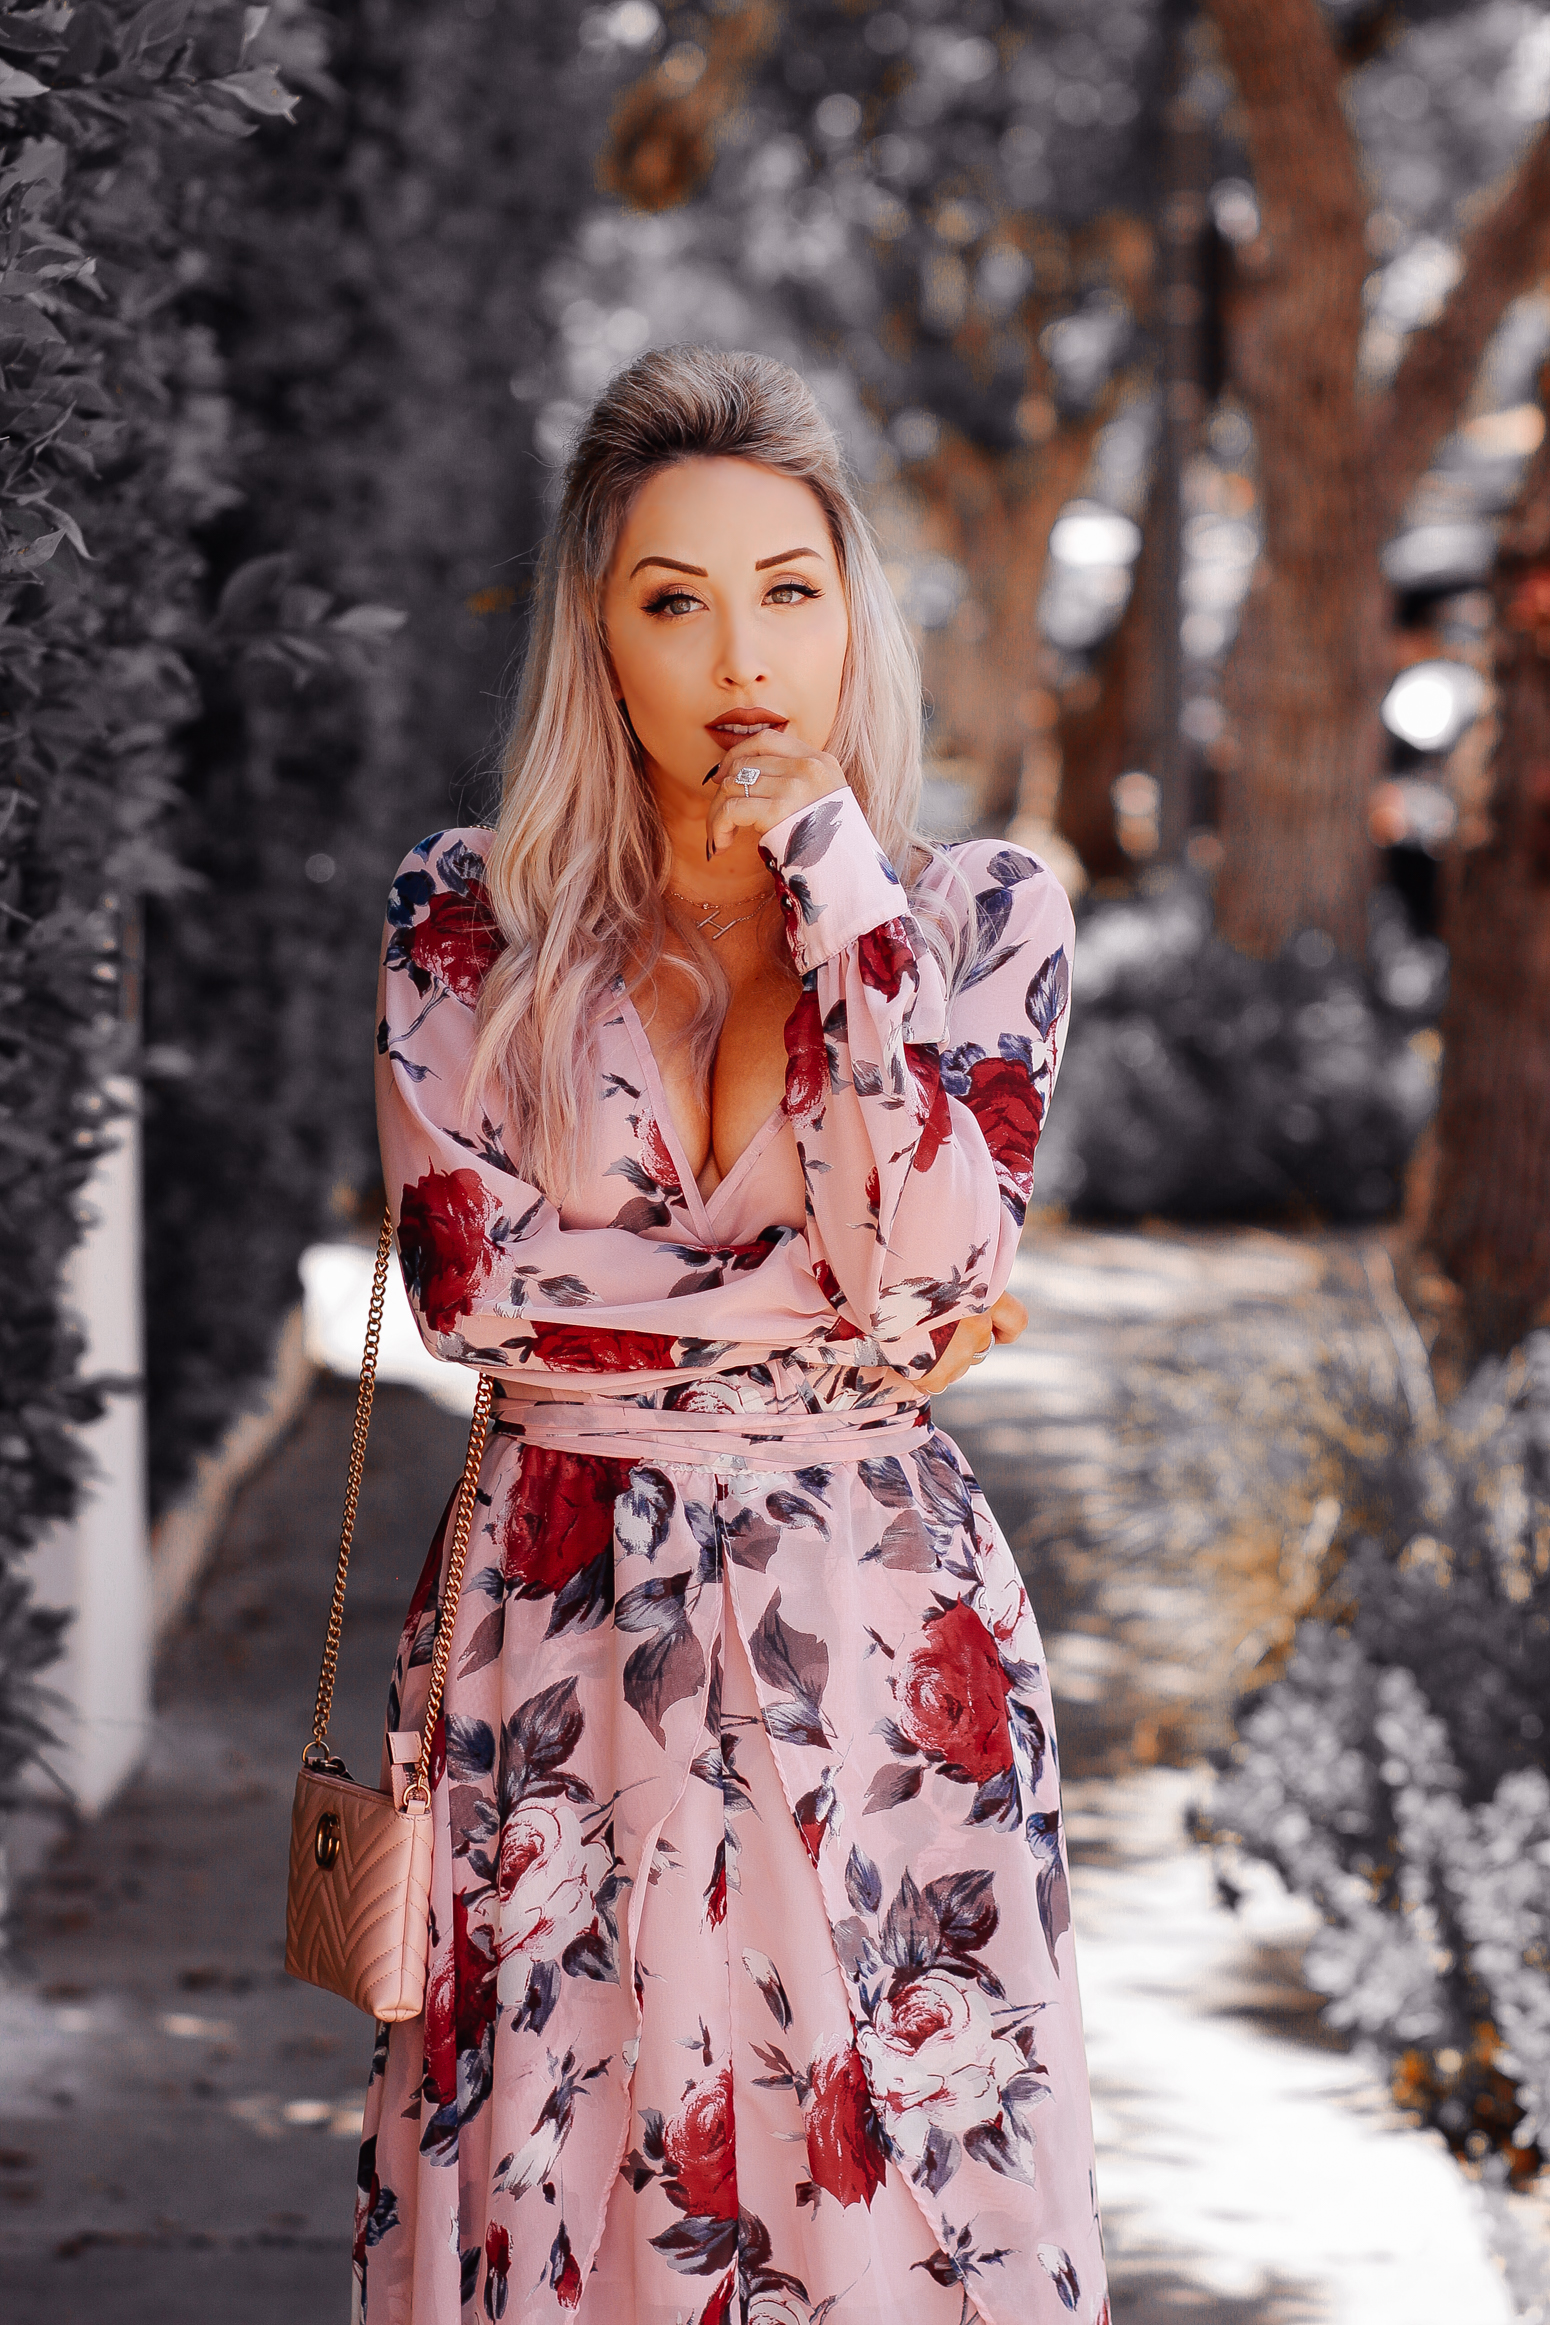 Blondie in the City | Pink & Rose Chiffon Dress | Pink Gucci Bag